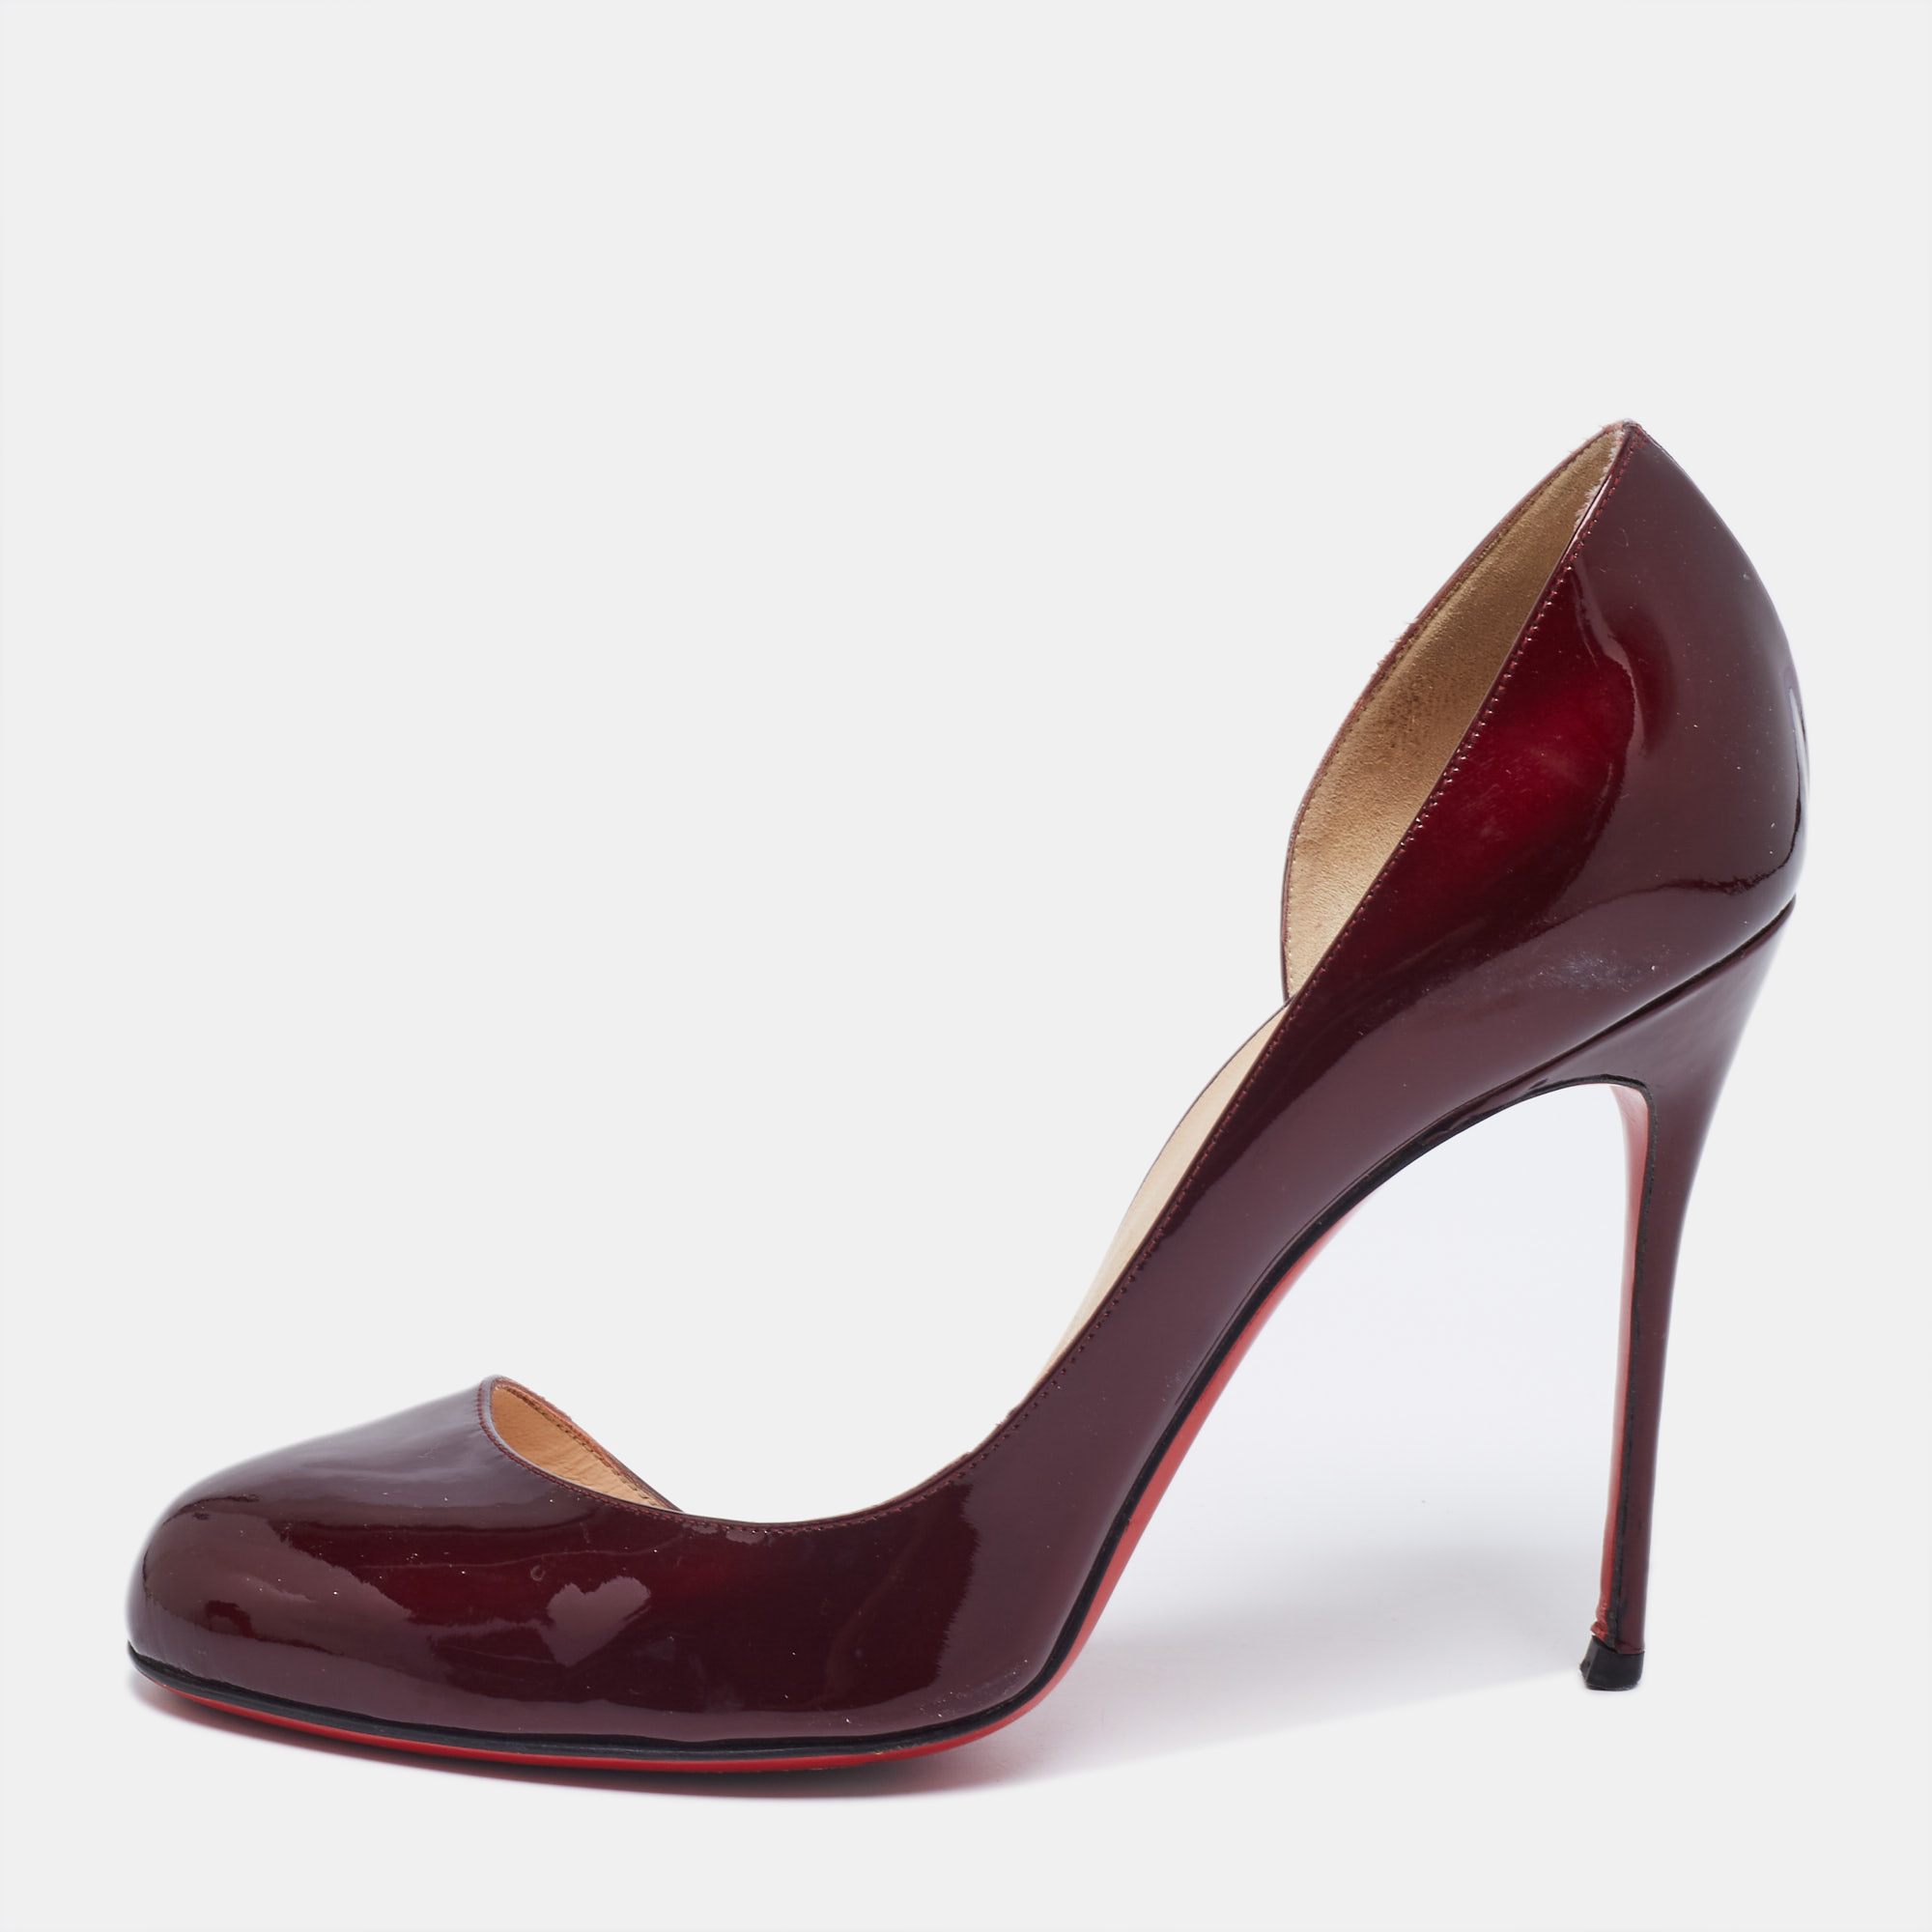 Pre-owned Christian Louboutin Burgundy Patent Leather Helmour D'orsay Pumps Size 39